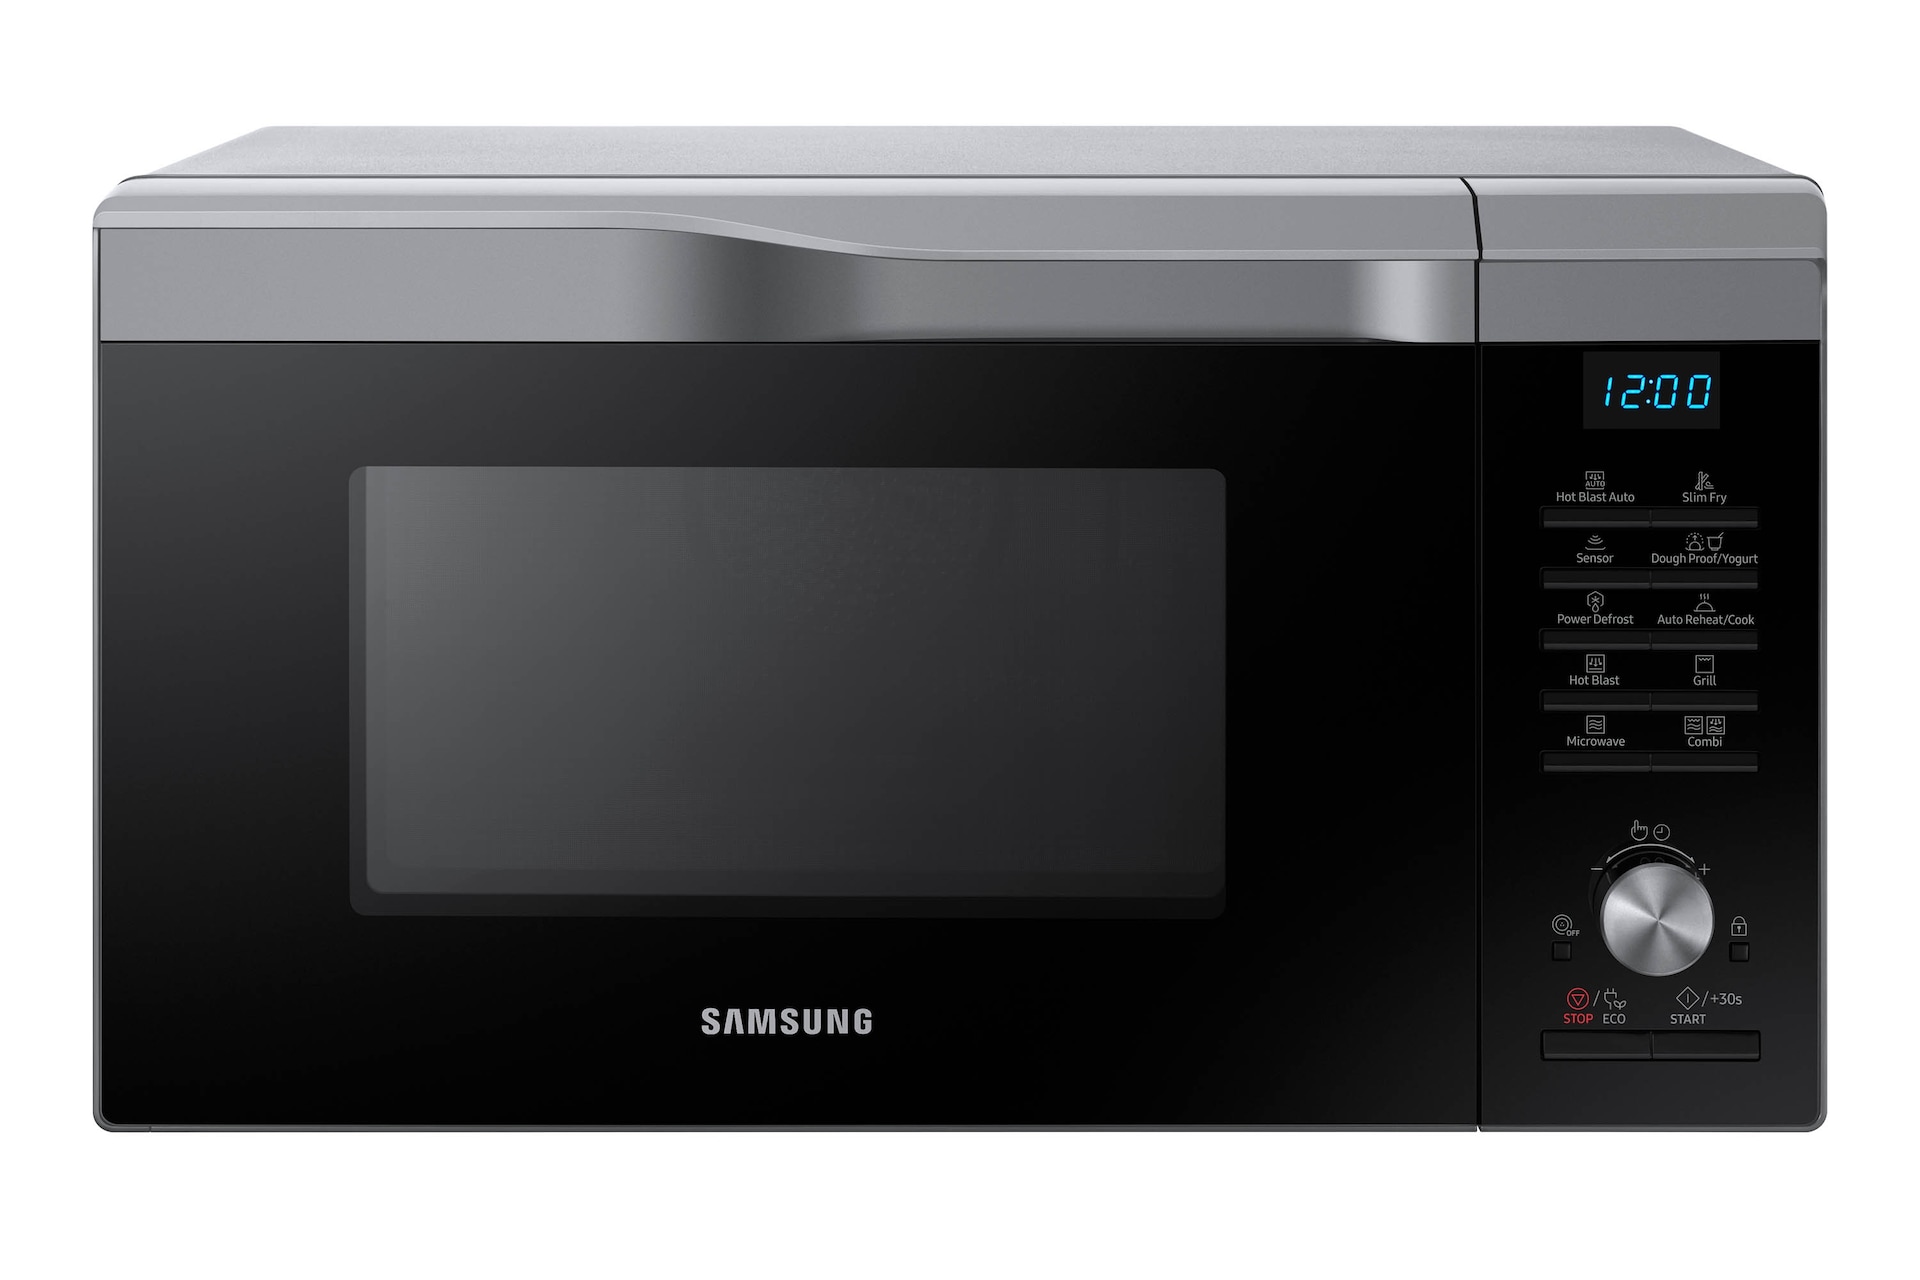 Front view of a silver Samsung Combination Microwave oven (28L model) with HotBlast Technology